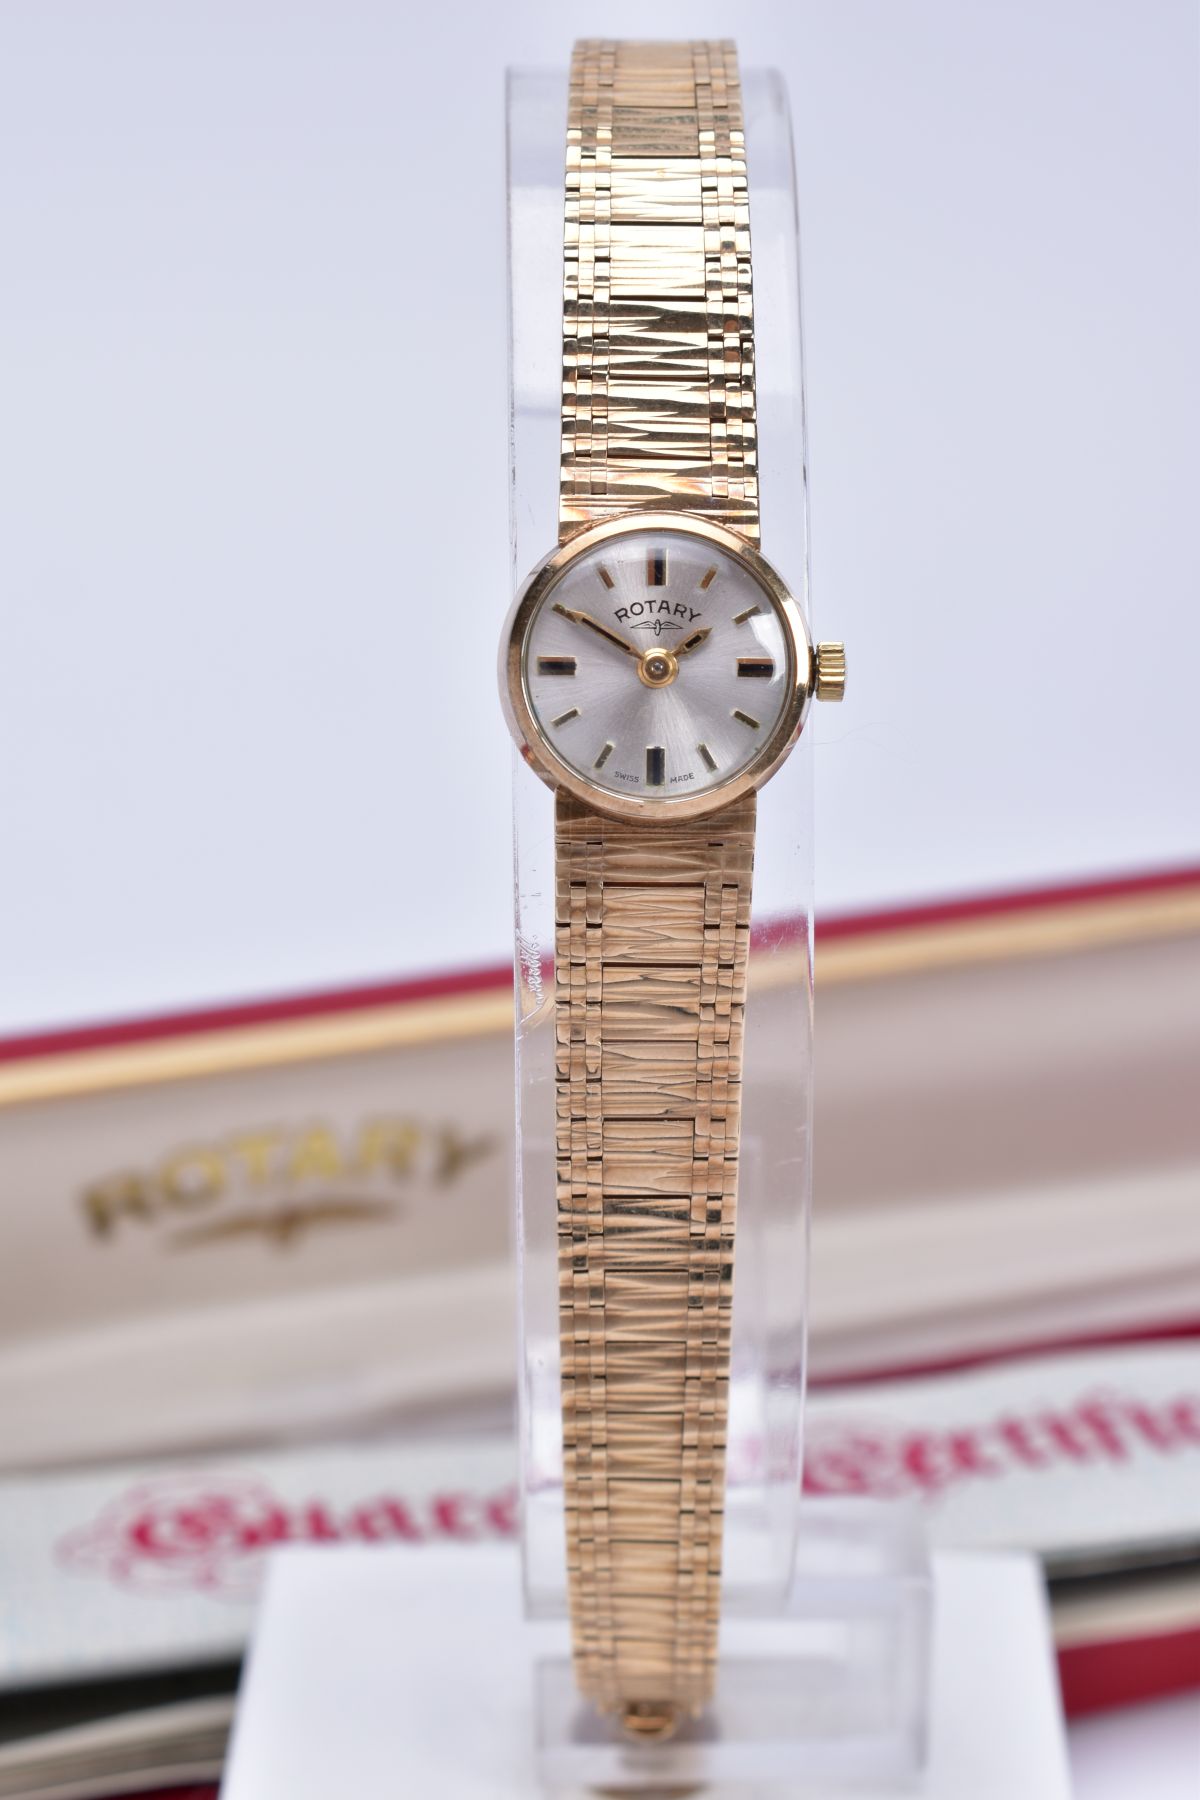 A MID TO LATE TWENTIETH CENTURY LADY'S ROTARY 9CT GOLD WATCH, a round case measuring approximately